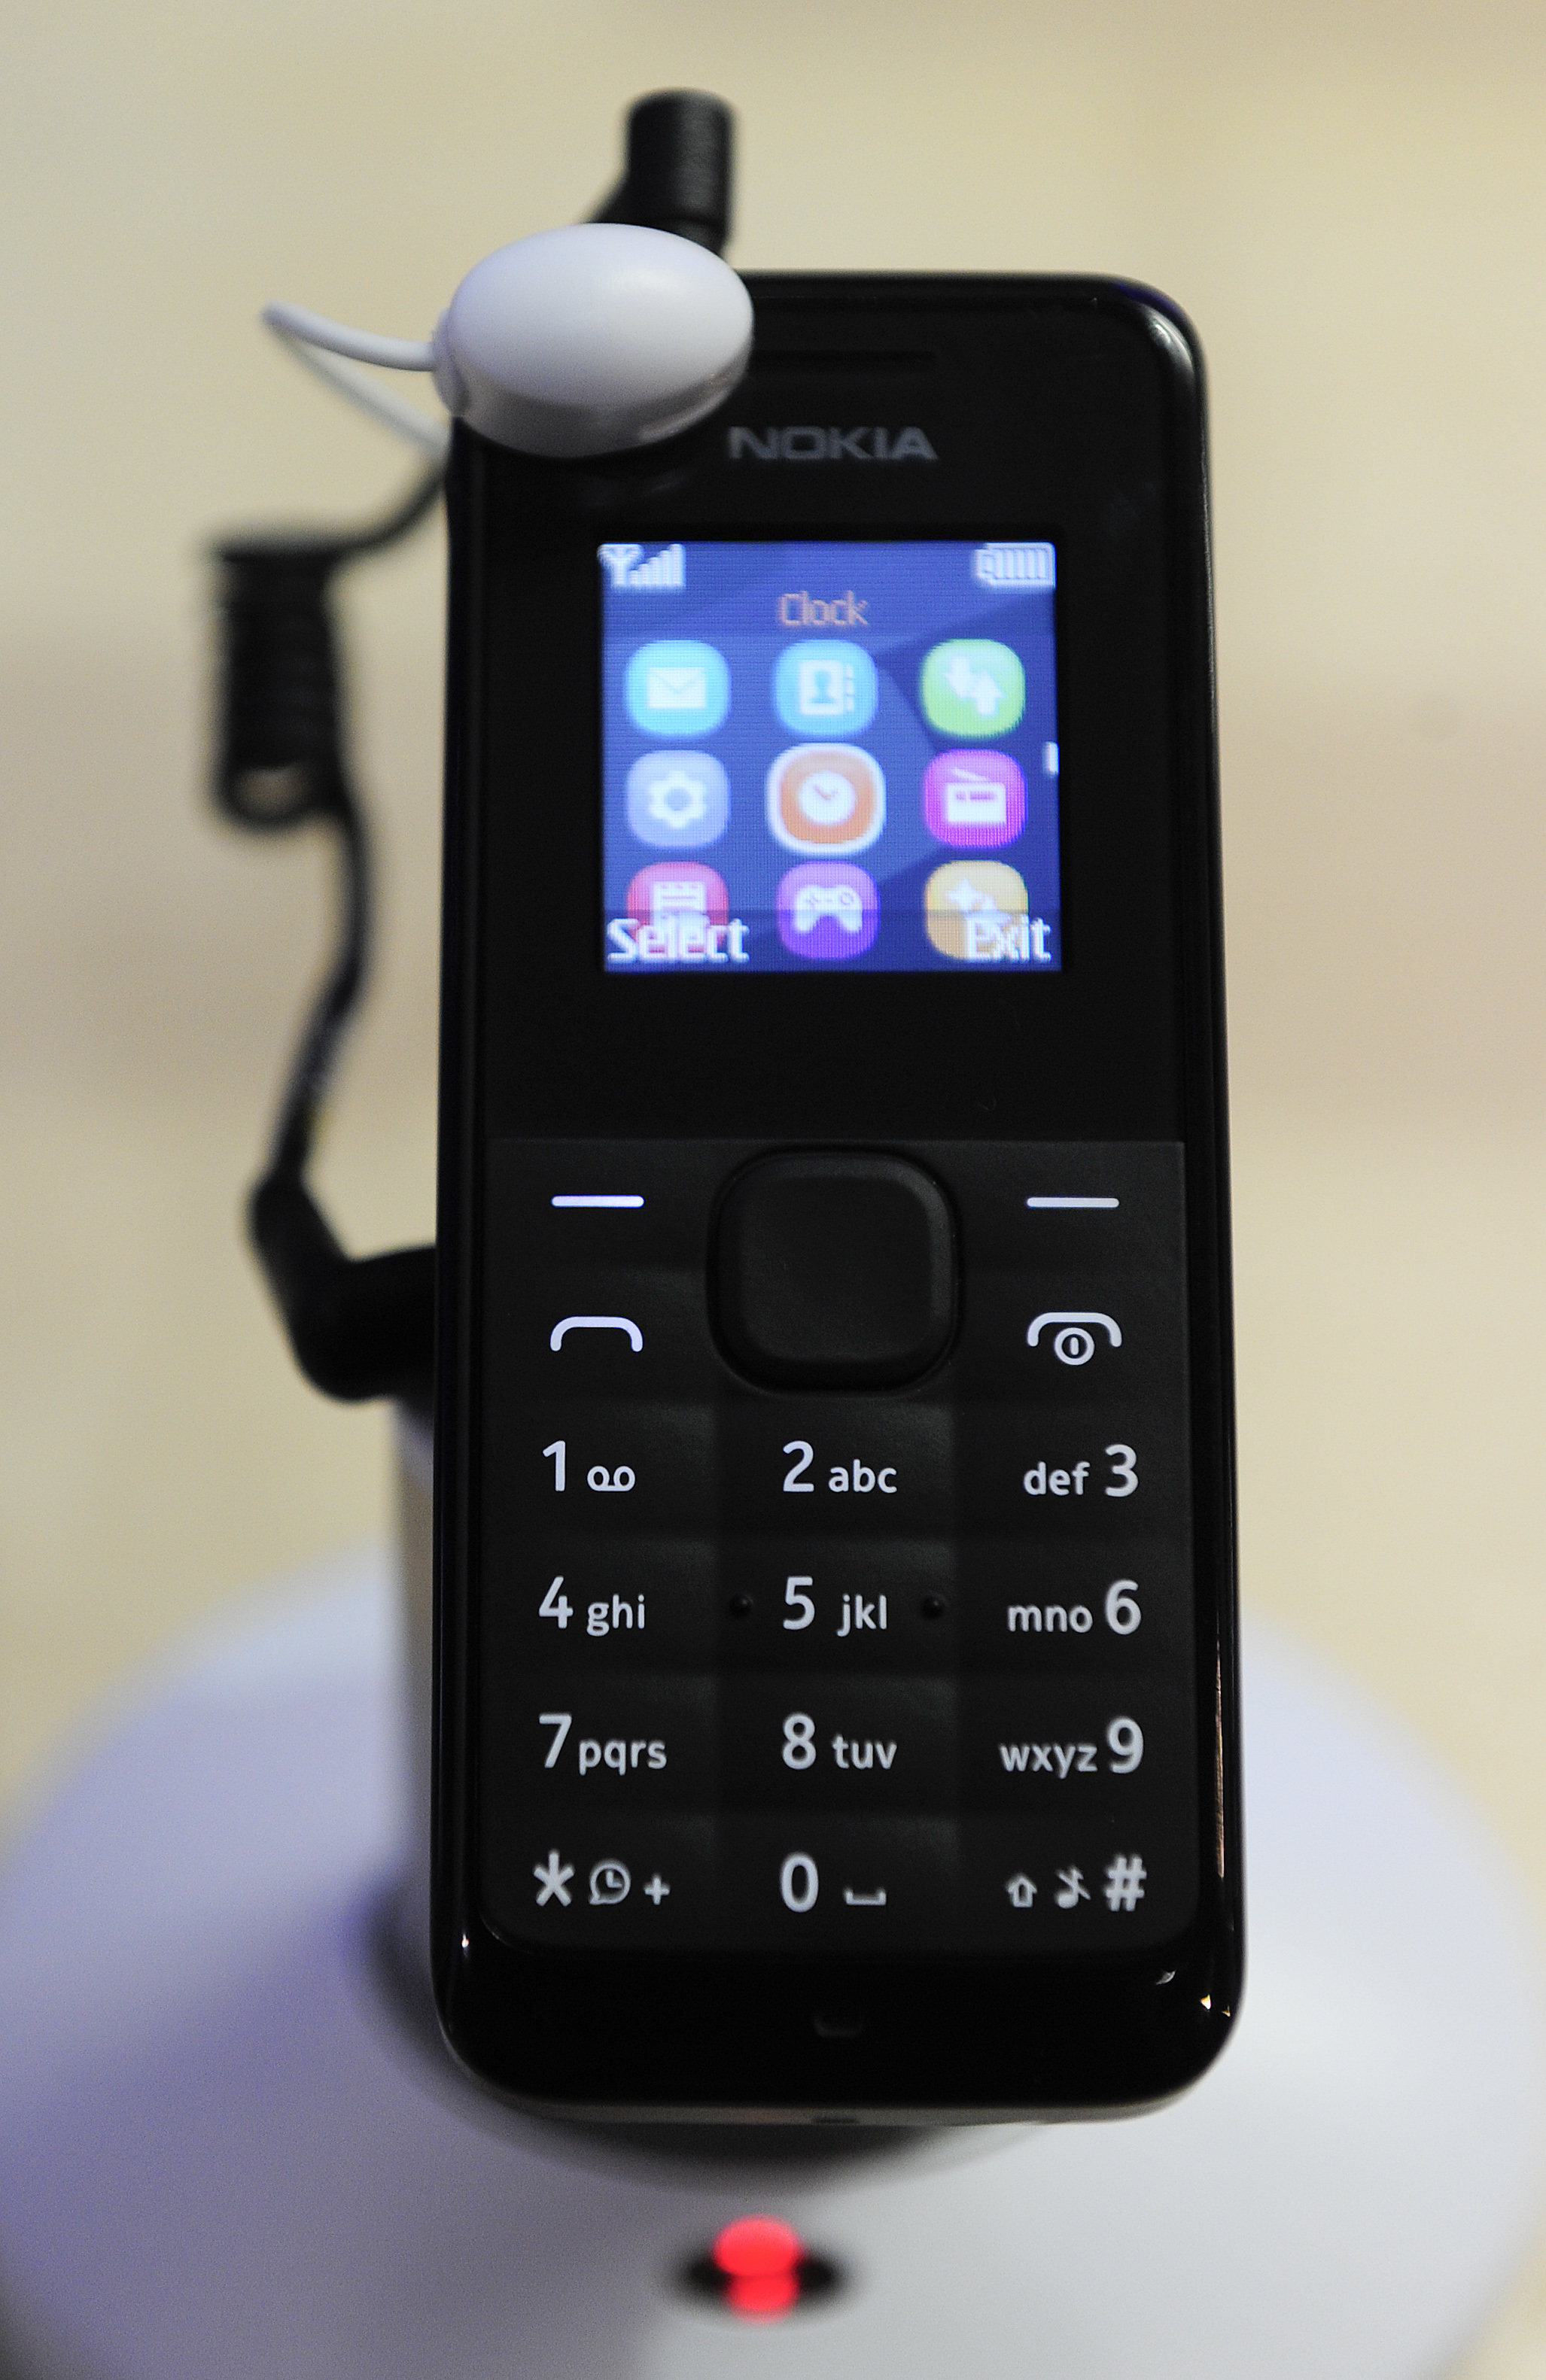 The "Nokia 105" mobile phone by Nokia. (Josep Lago—AFP/Getty Images)